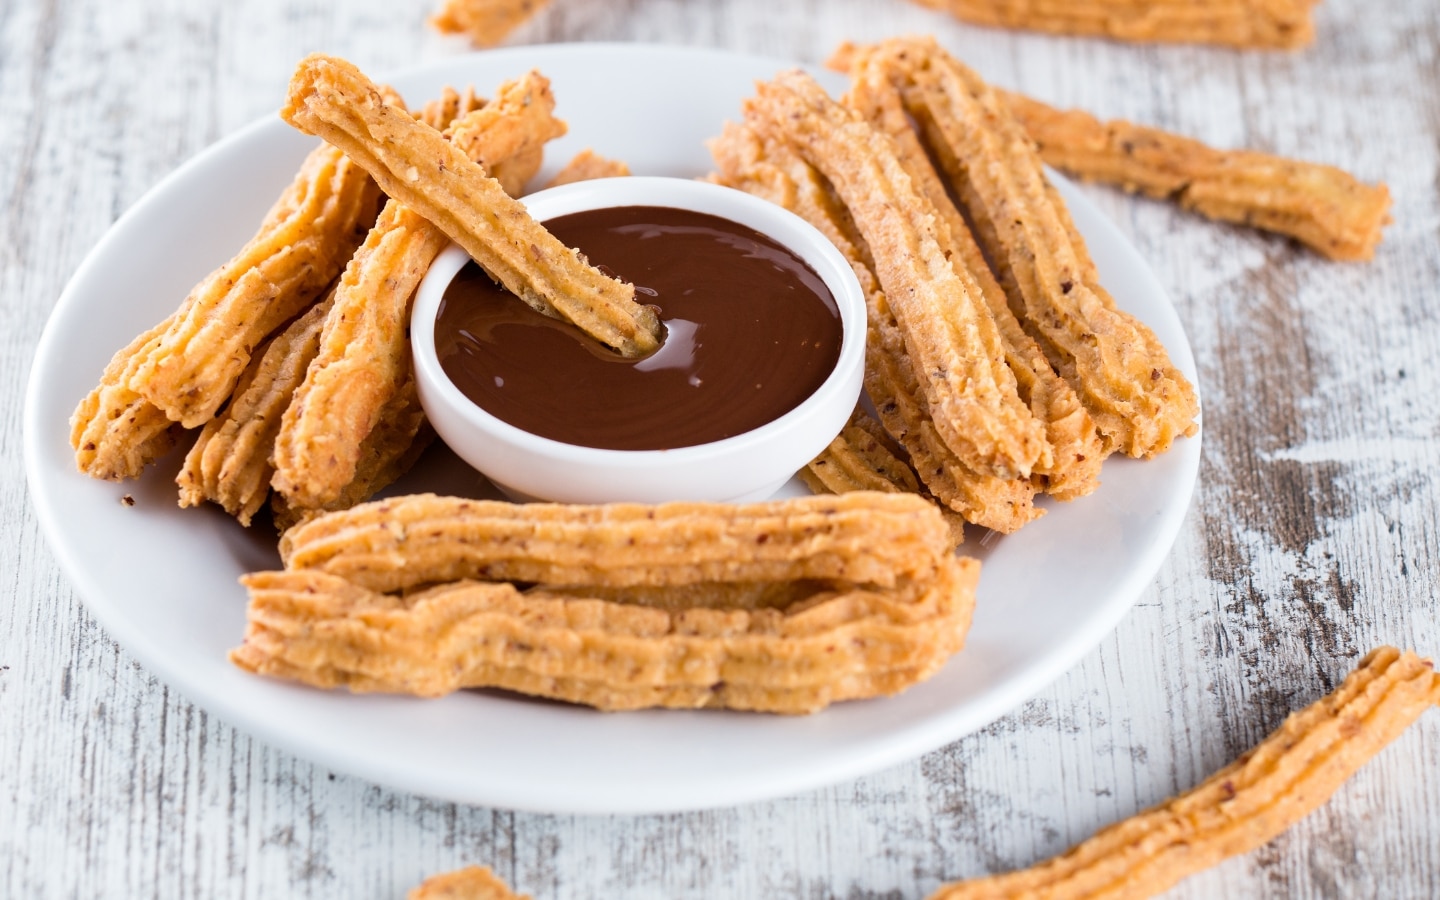 What Are Churros